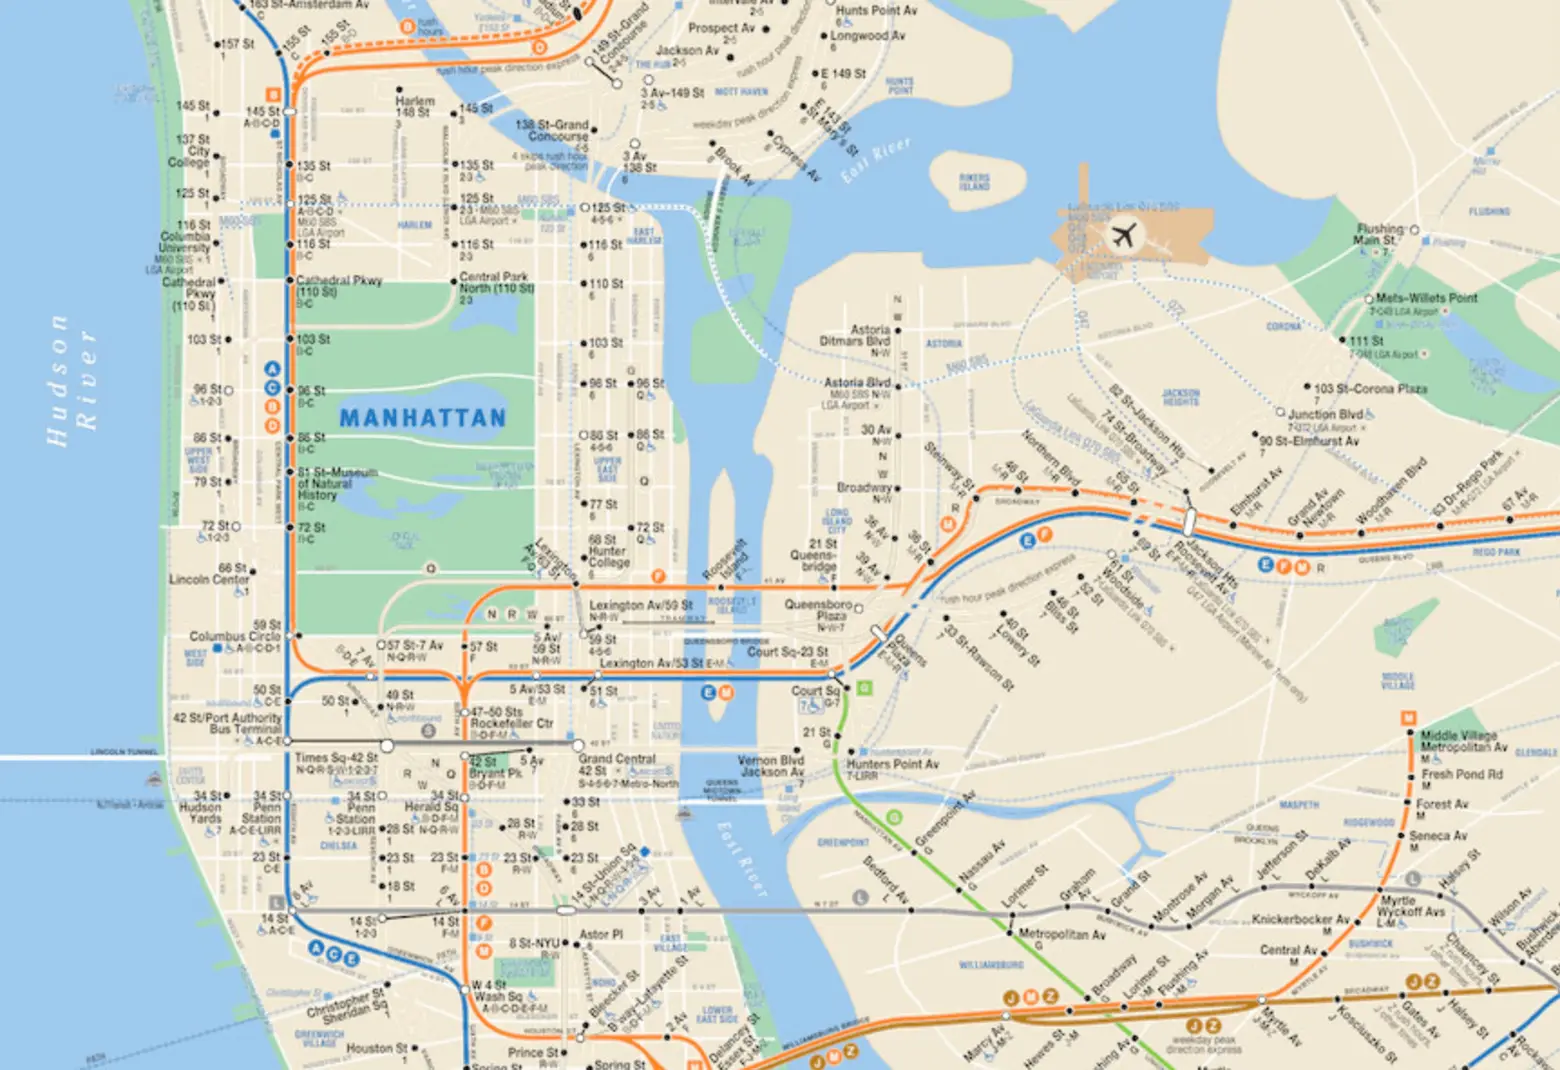 The Real MTA map shows only the subway lines that are currently functioning